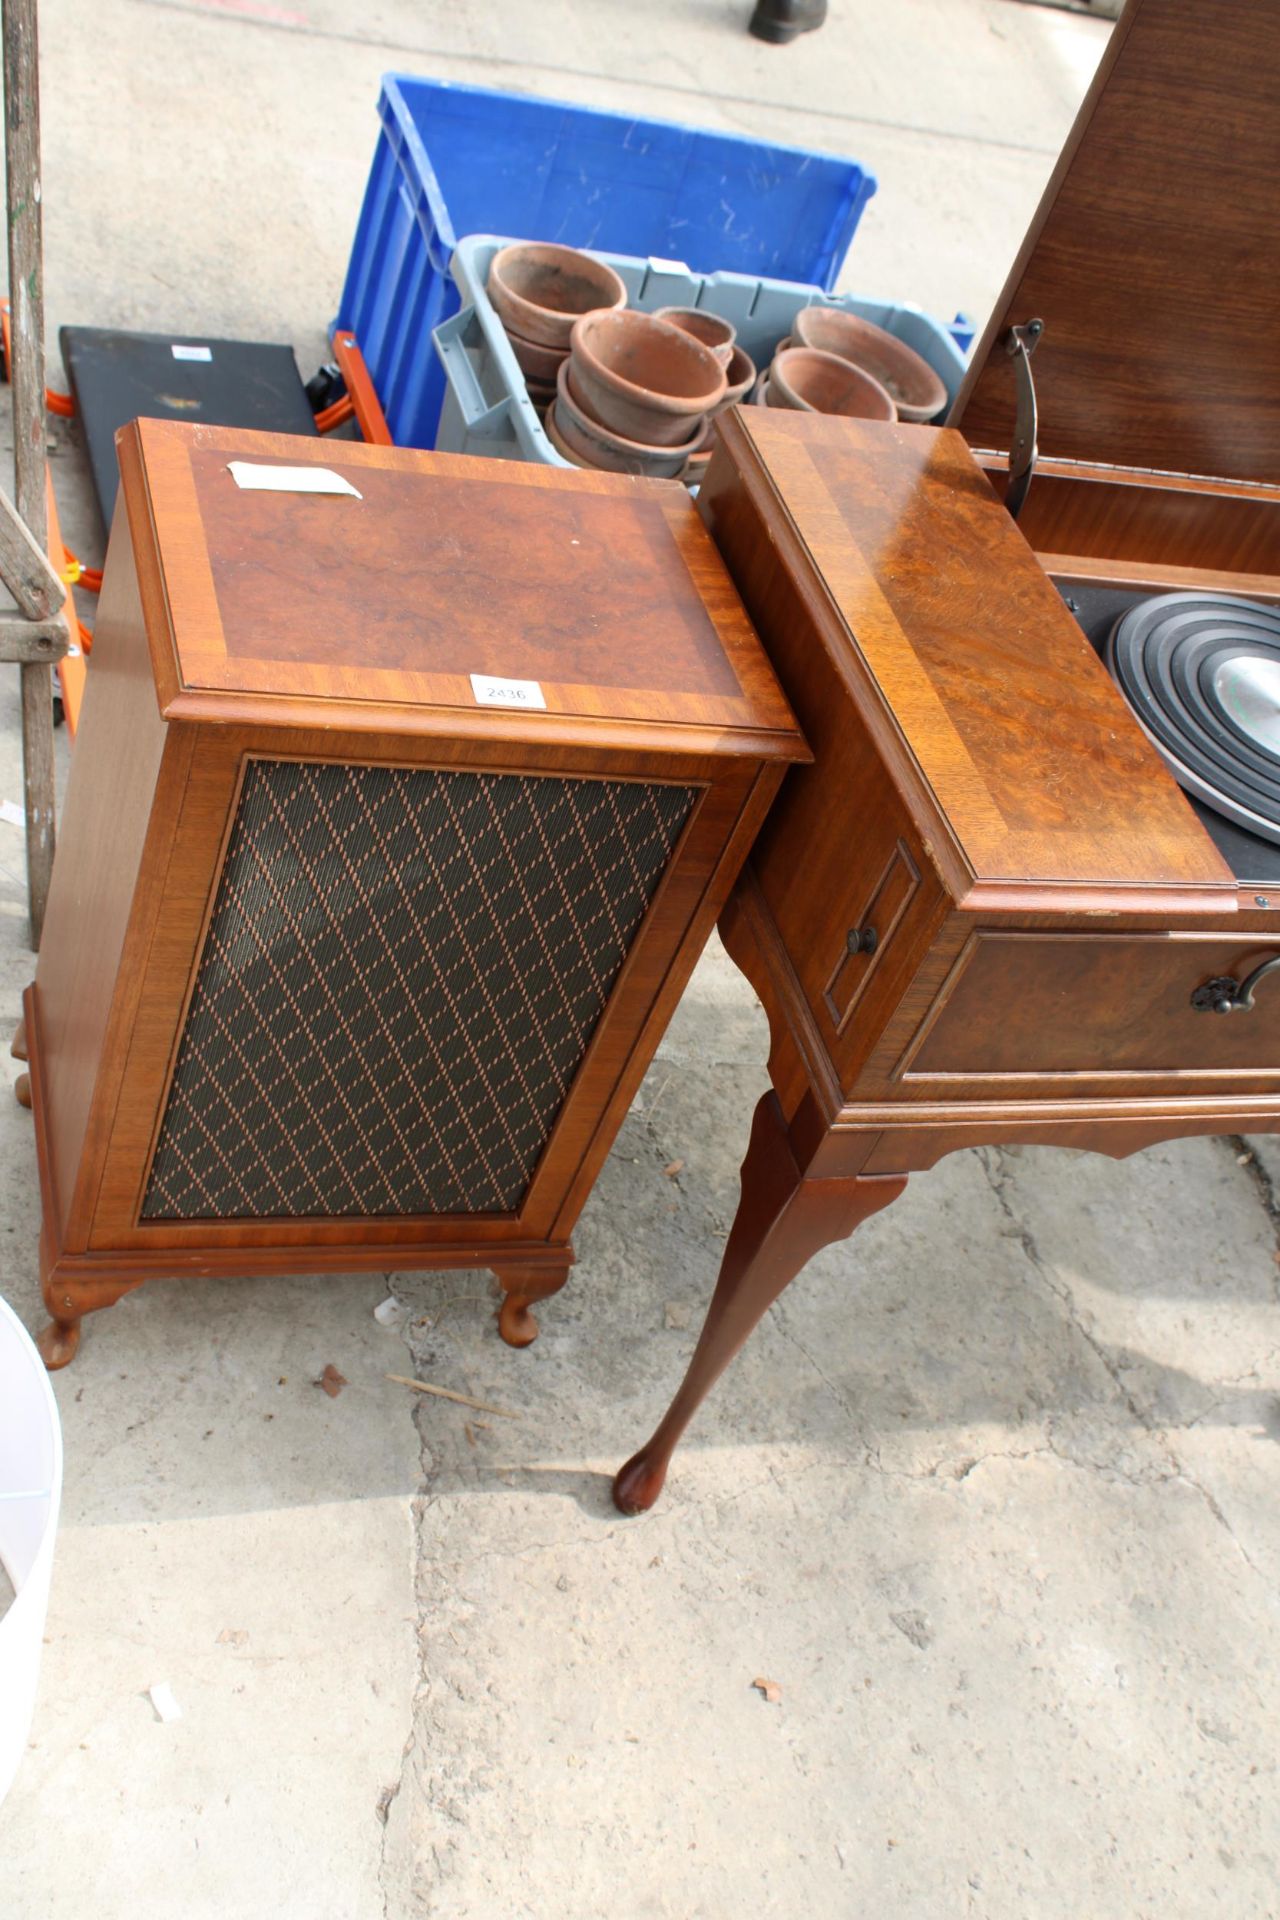 A VINTAGE MID CENTURY RADIOGRAM WITH A DRAYTON DECK AND SPEAKERS - Image 4 of 6